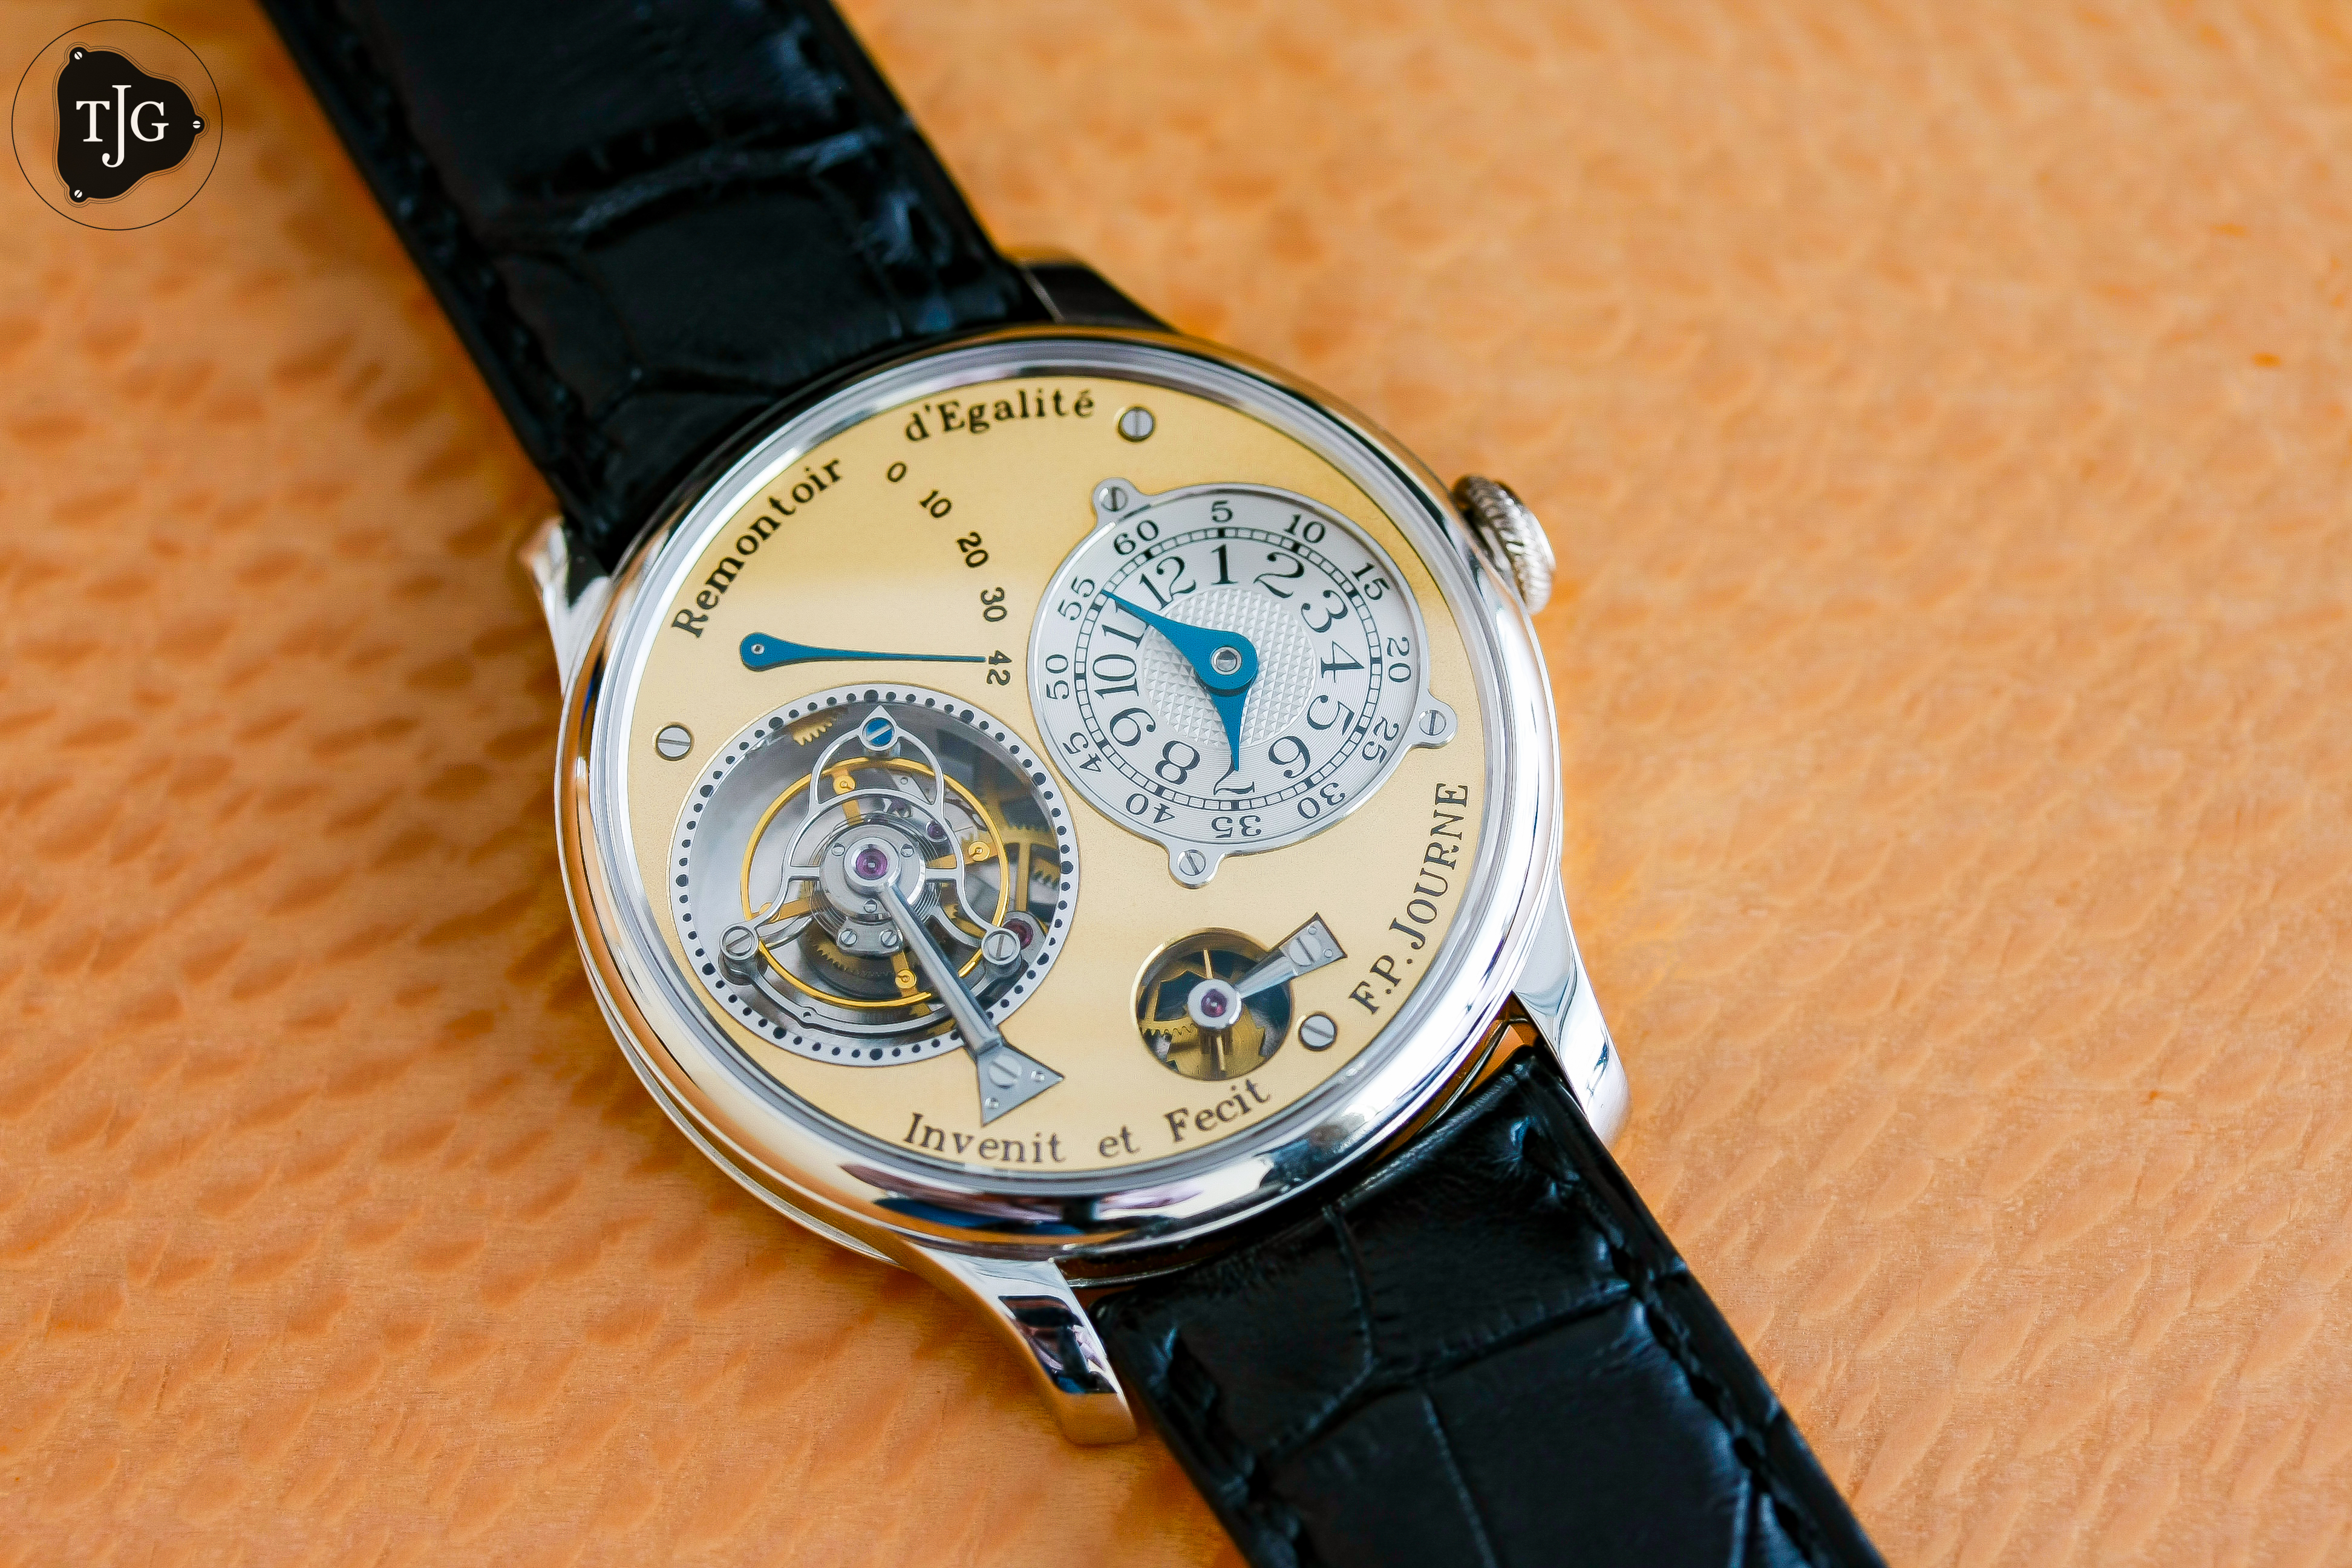 A Closer Look at the N°000 Tourbillon Souverain with a Blued Screw